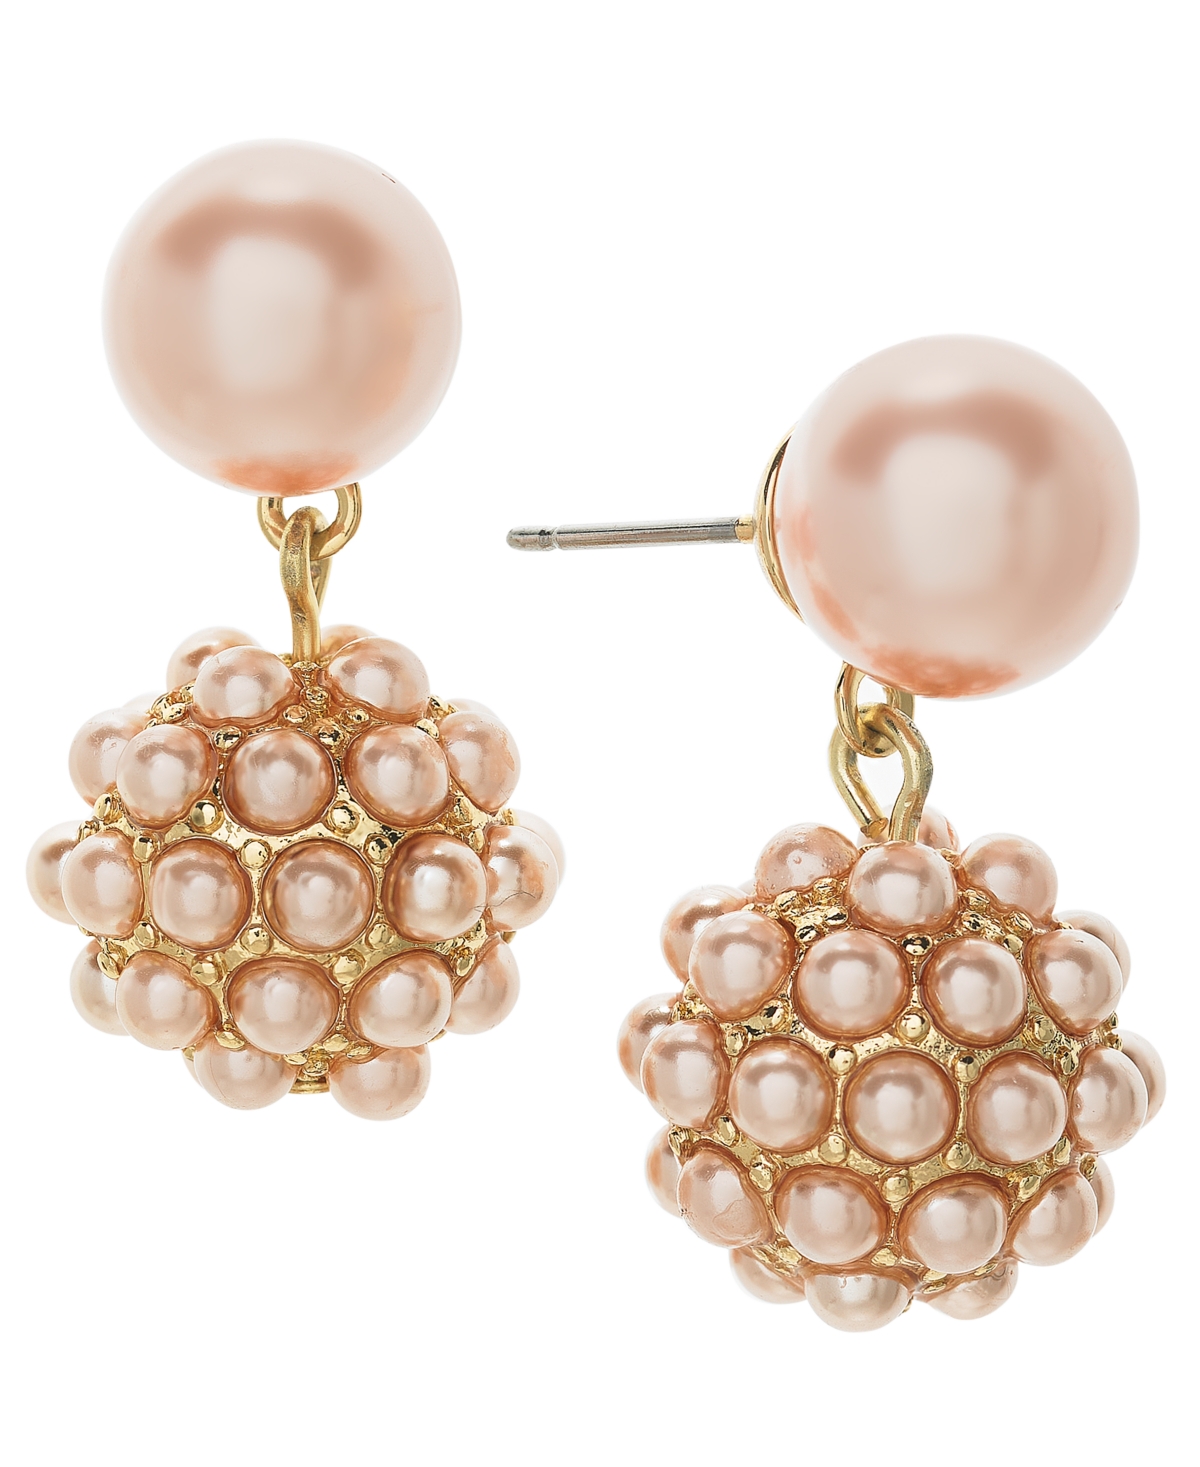 Gold-Tone Beaded Cluster Drop Earrings, Created for Macy's - Pink